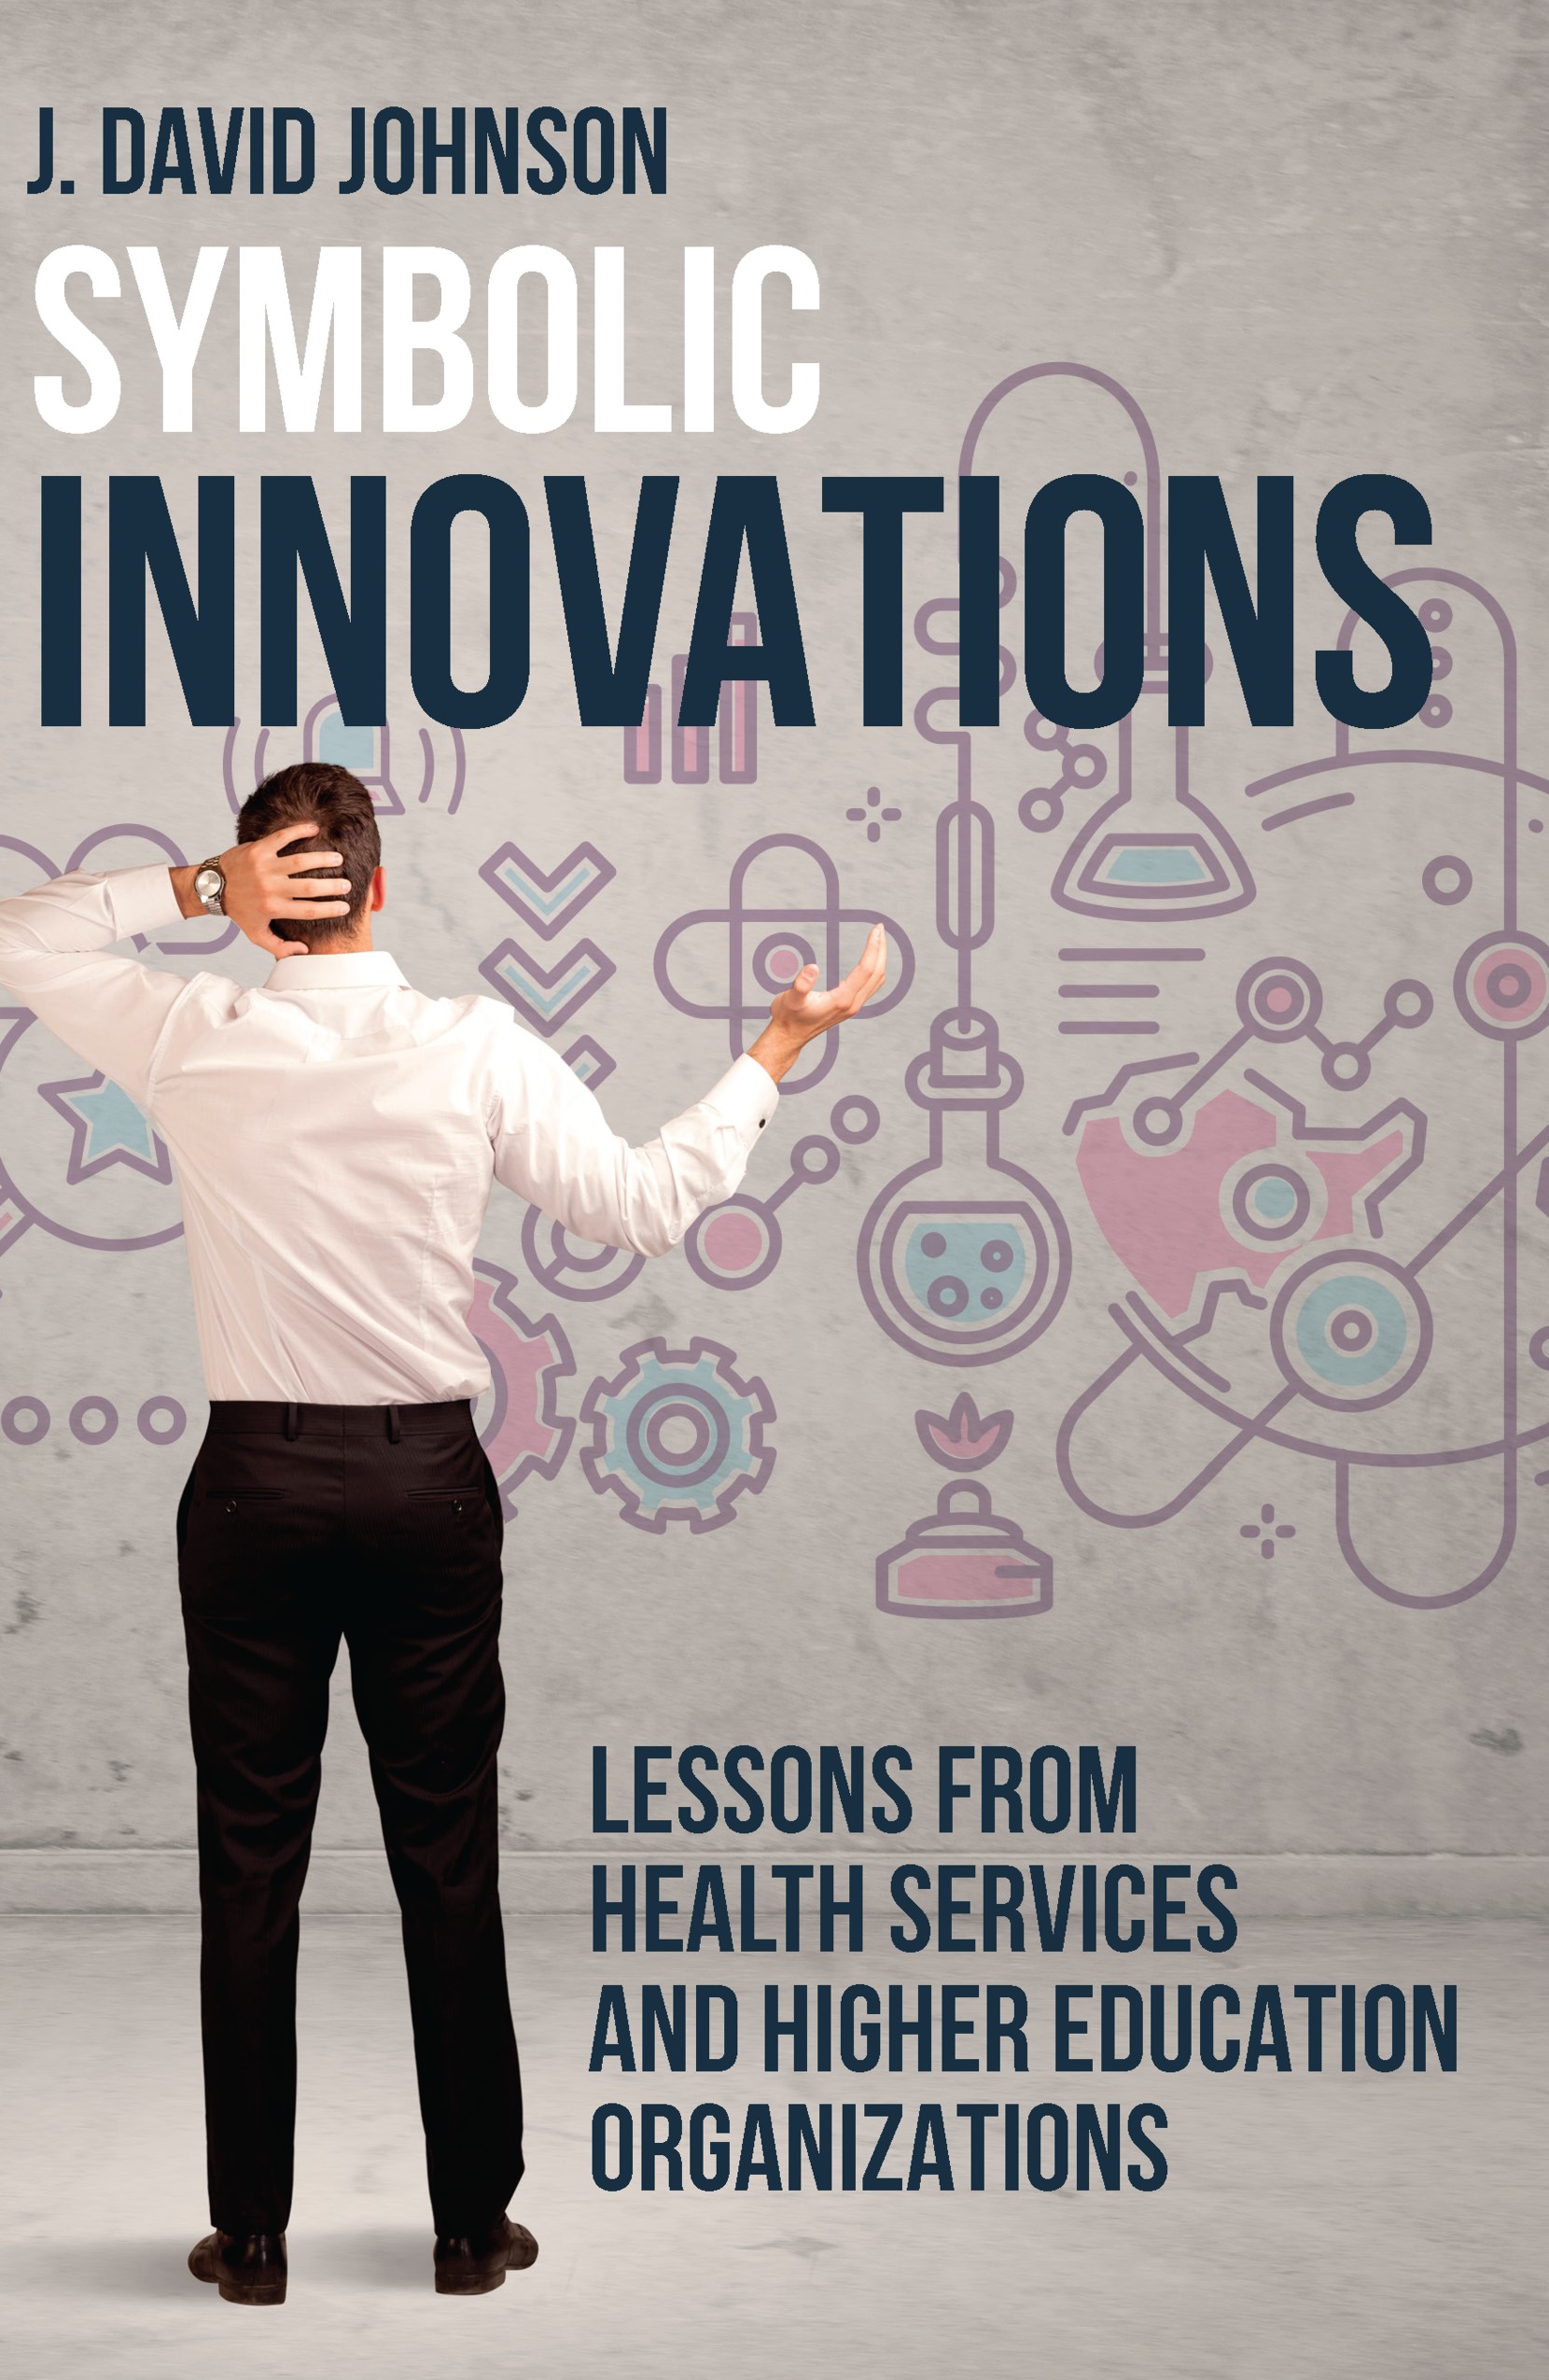 Symbolic Innovations: Lessons from Health Services and Higher Education Organizations (PDF)